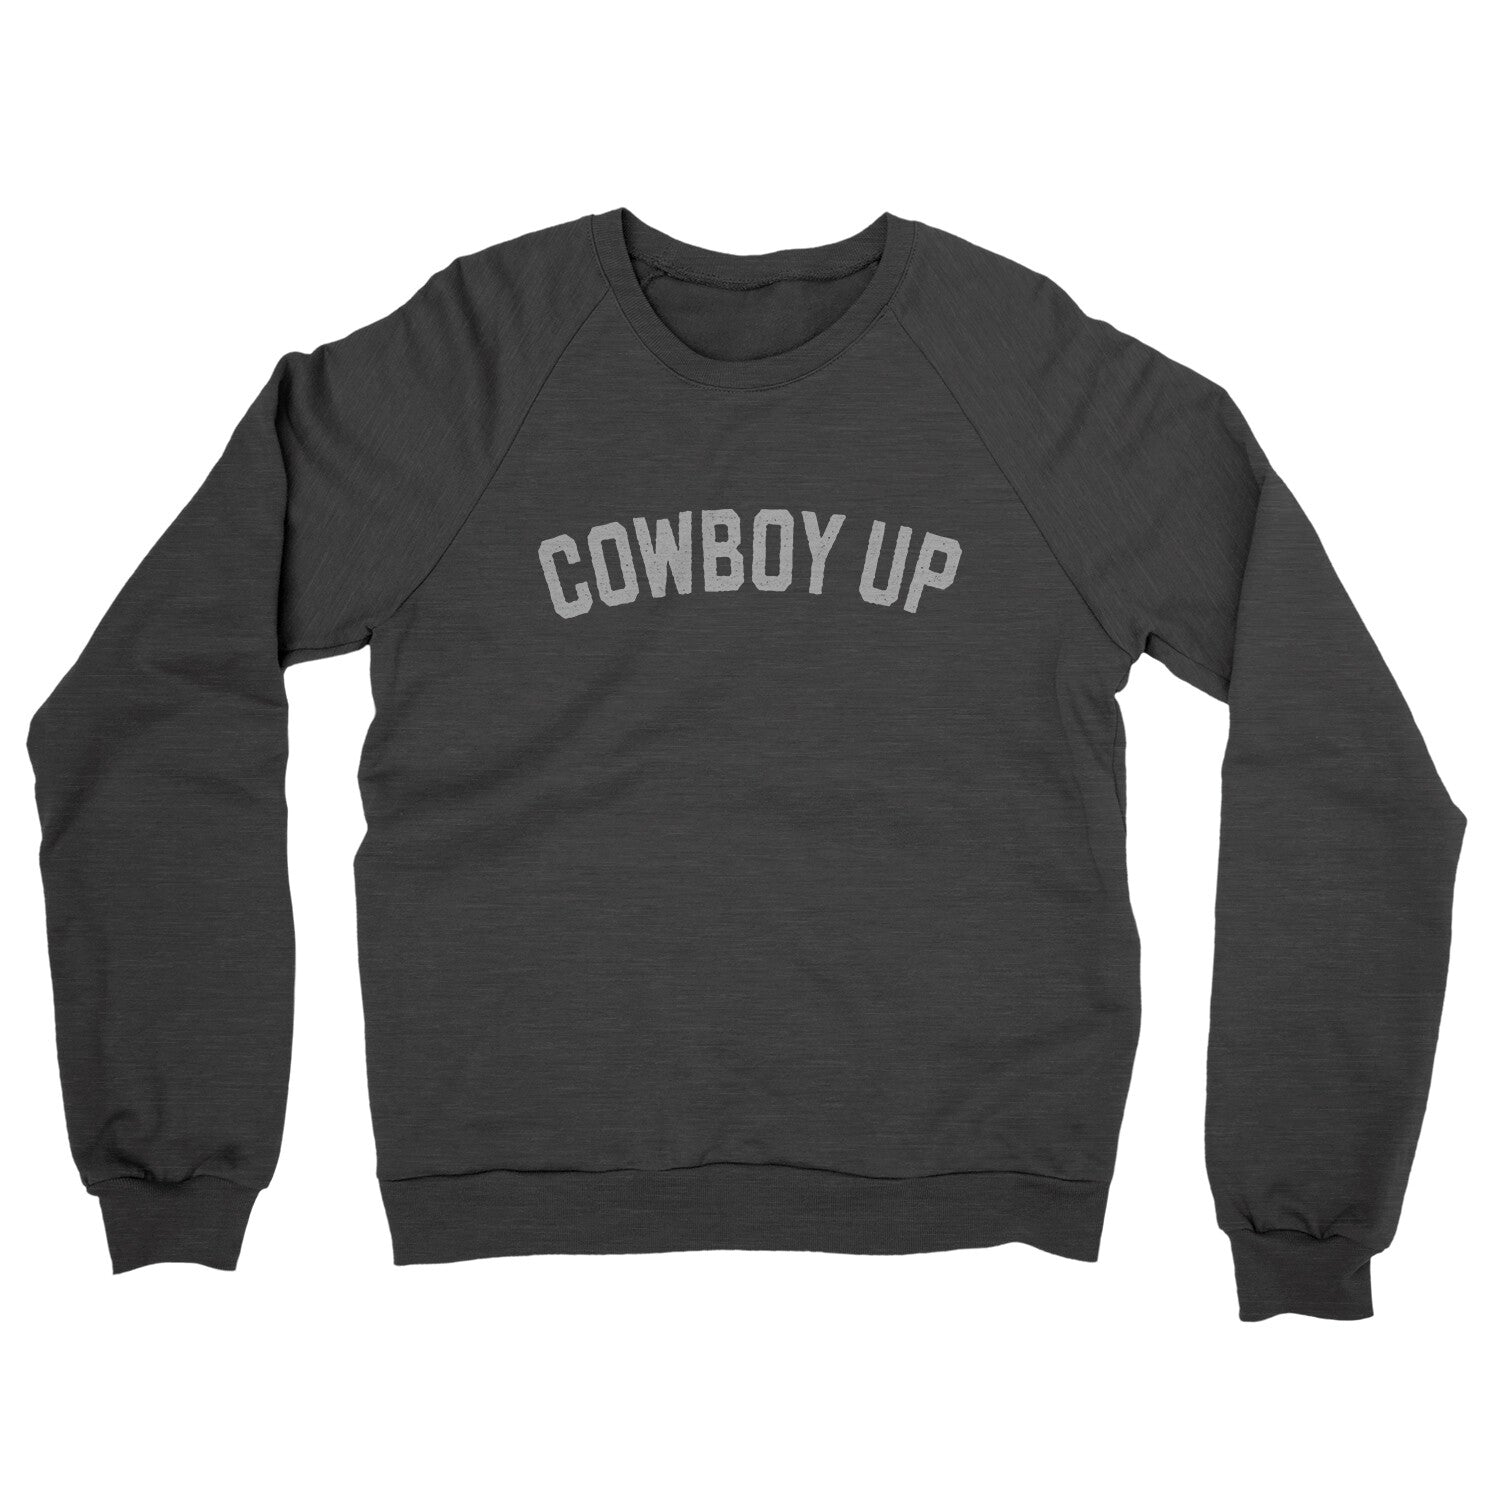 Cowboy Up in Charcoal Heather Color